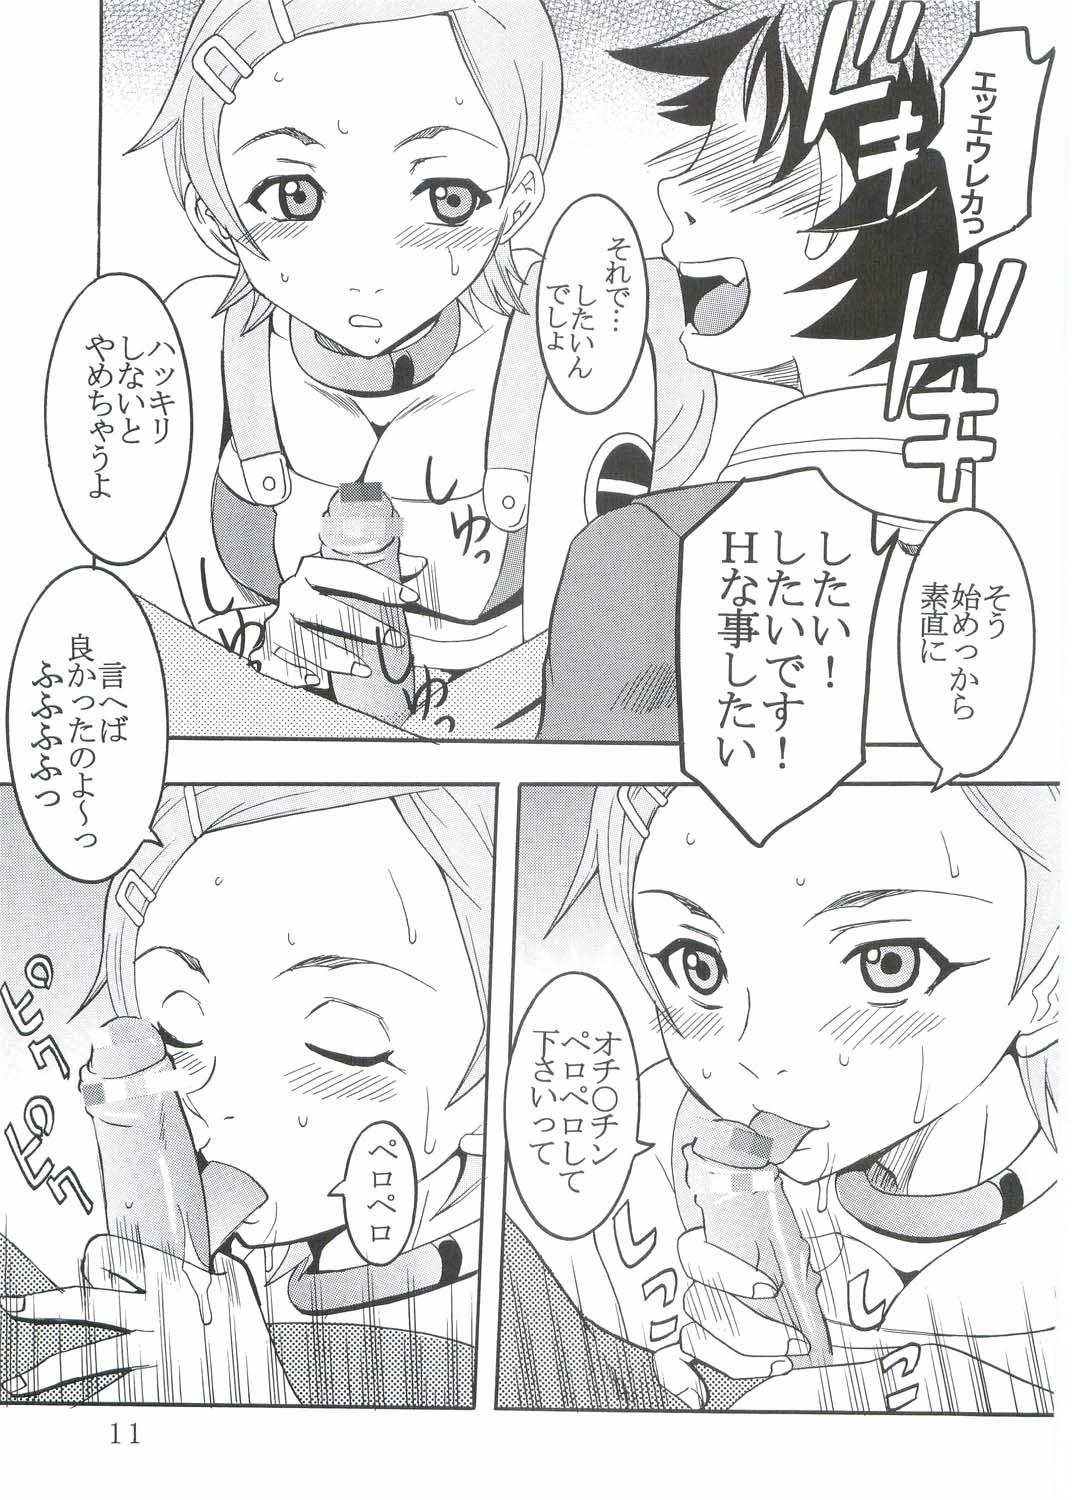 Sucking Ura ray-out - Eureka 7 Nudes - Page 12